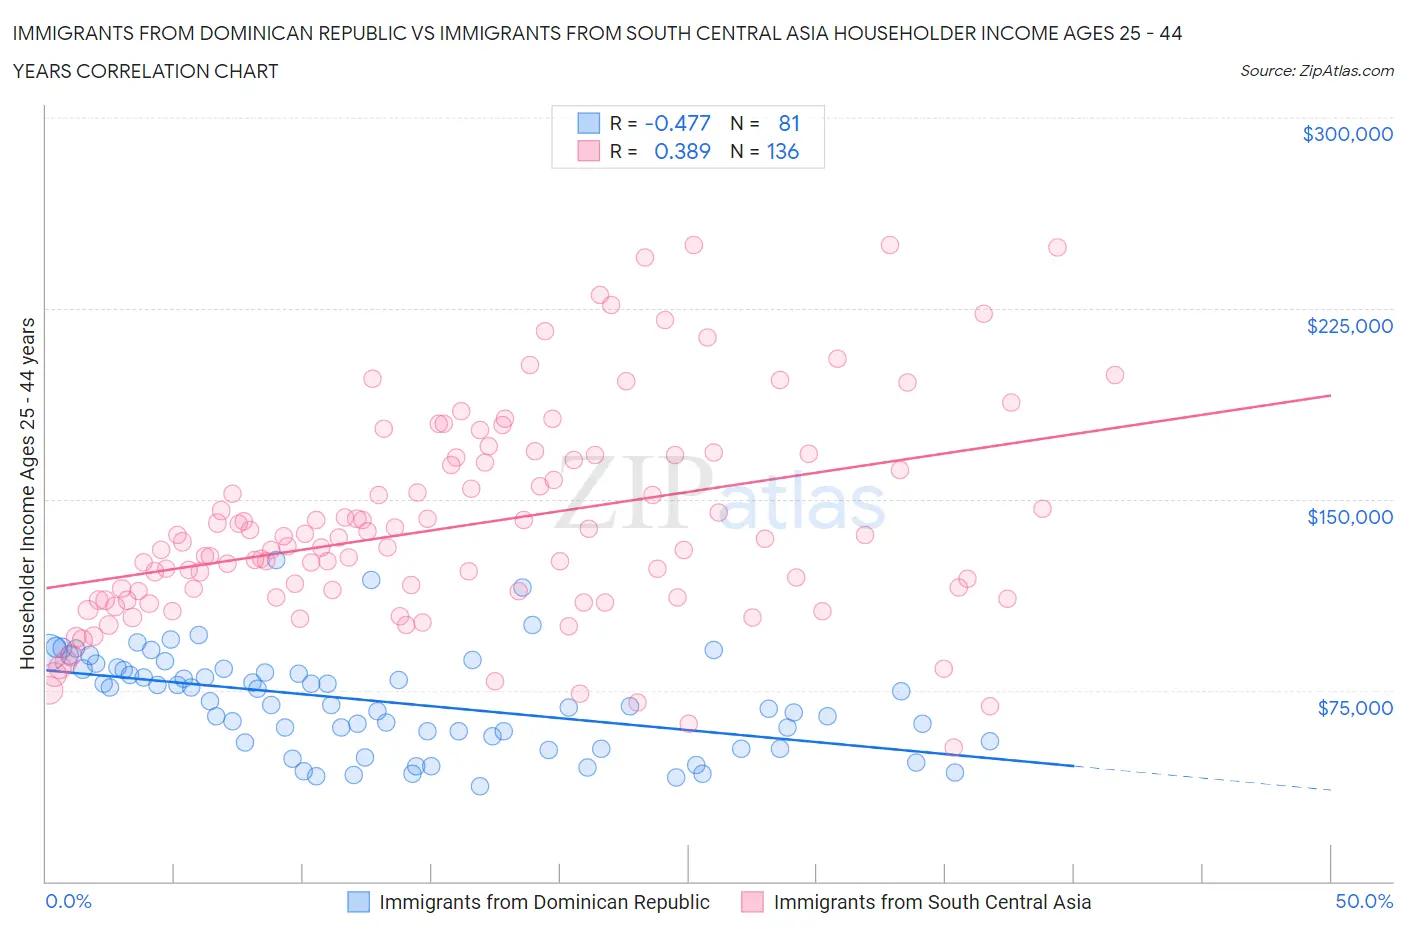 Immigrants from Dominican Republic vs Immigrants from South Central Asia Householder Income Ages 25 - 44 years